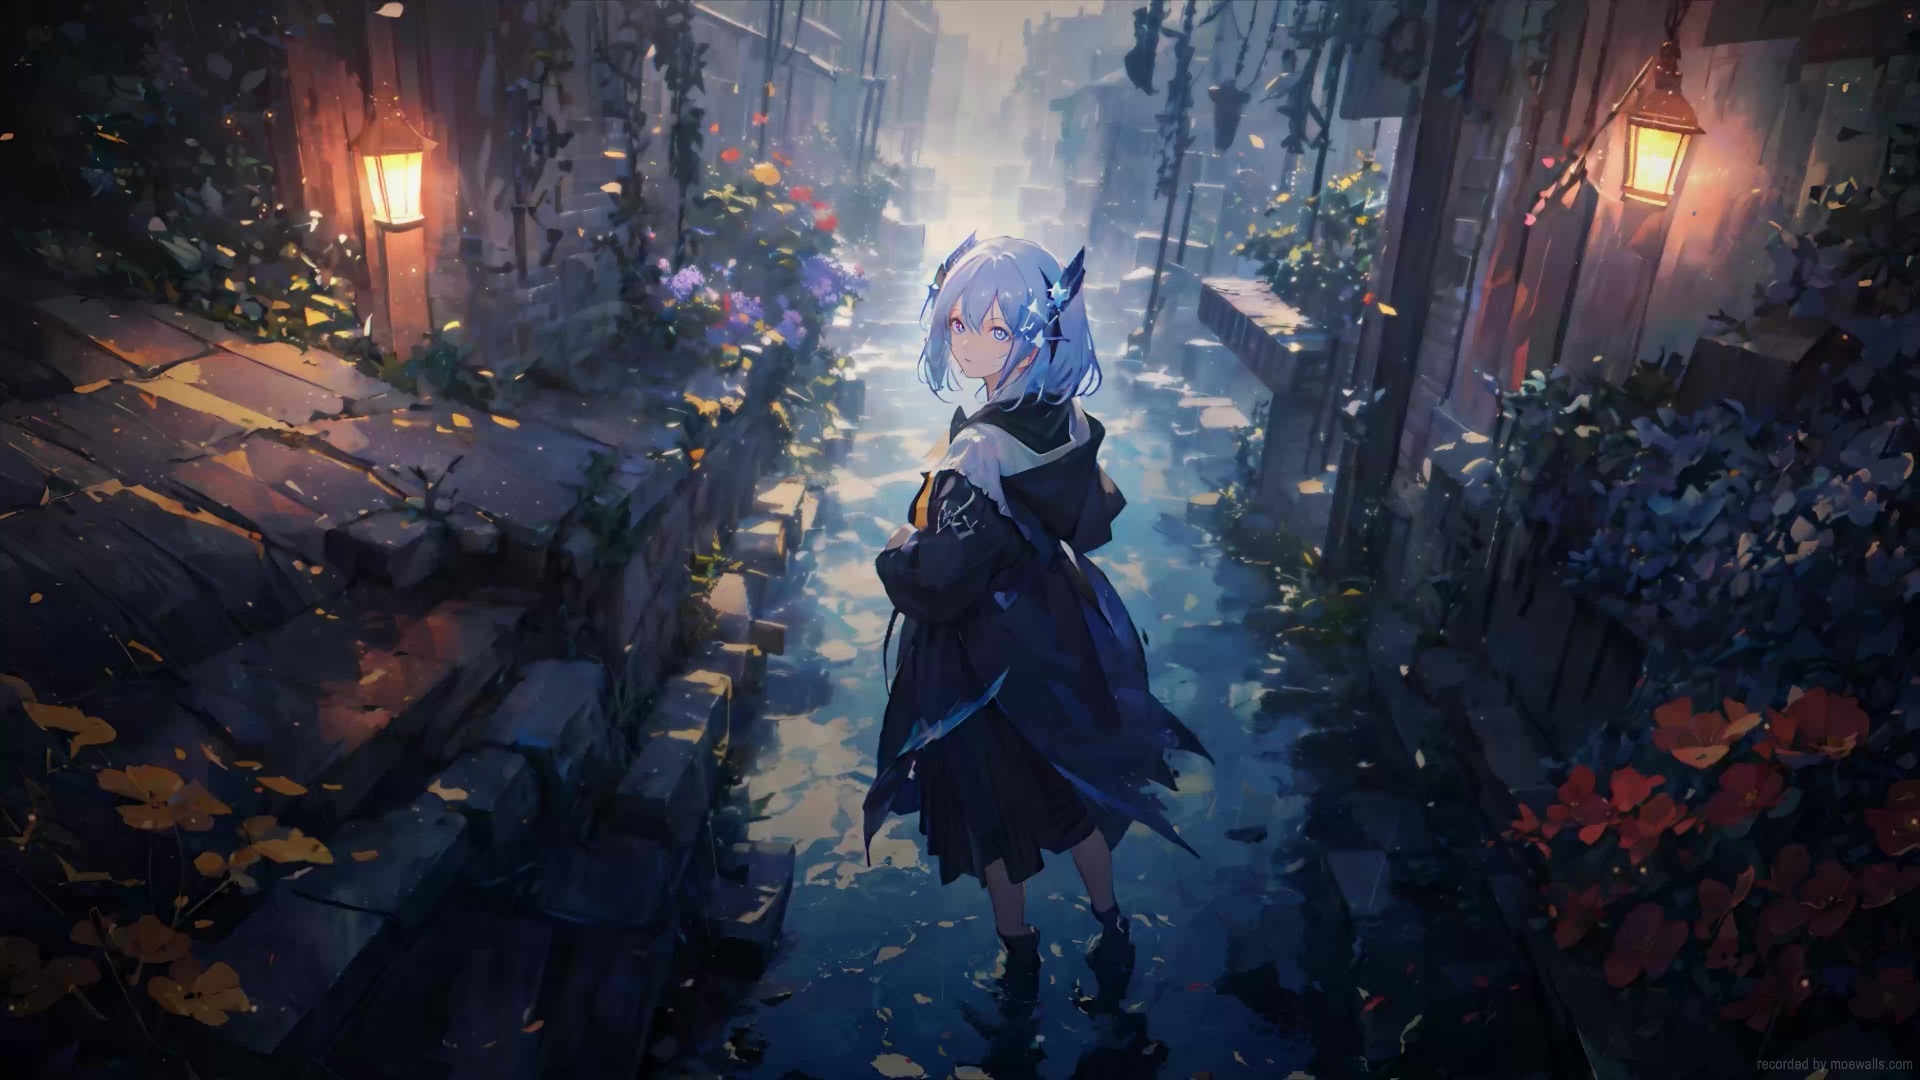 Download Get lost in the beauty of Rain Anime. Wallpaper | Wallpapers.com